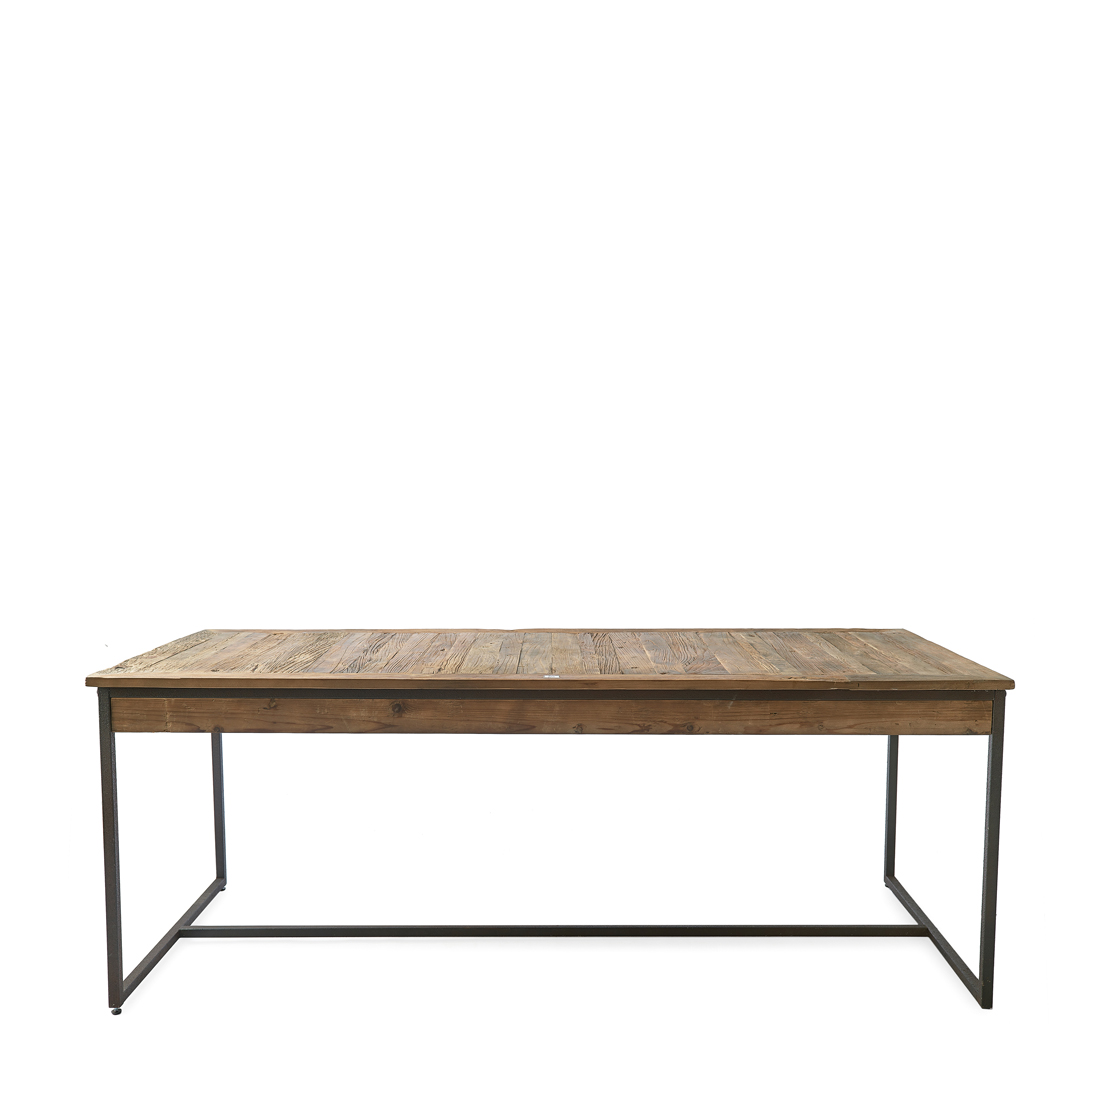 Shelter Island Dining Table 200x90